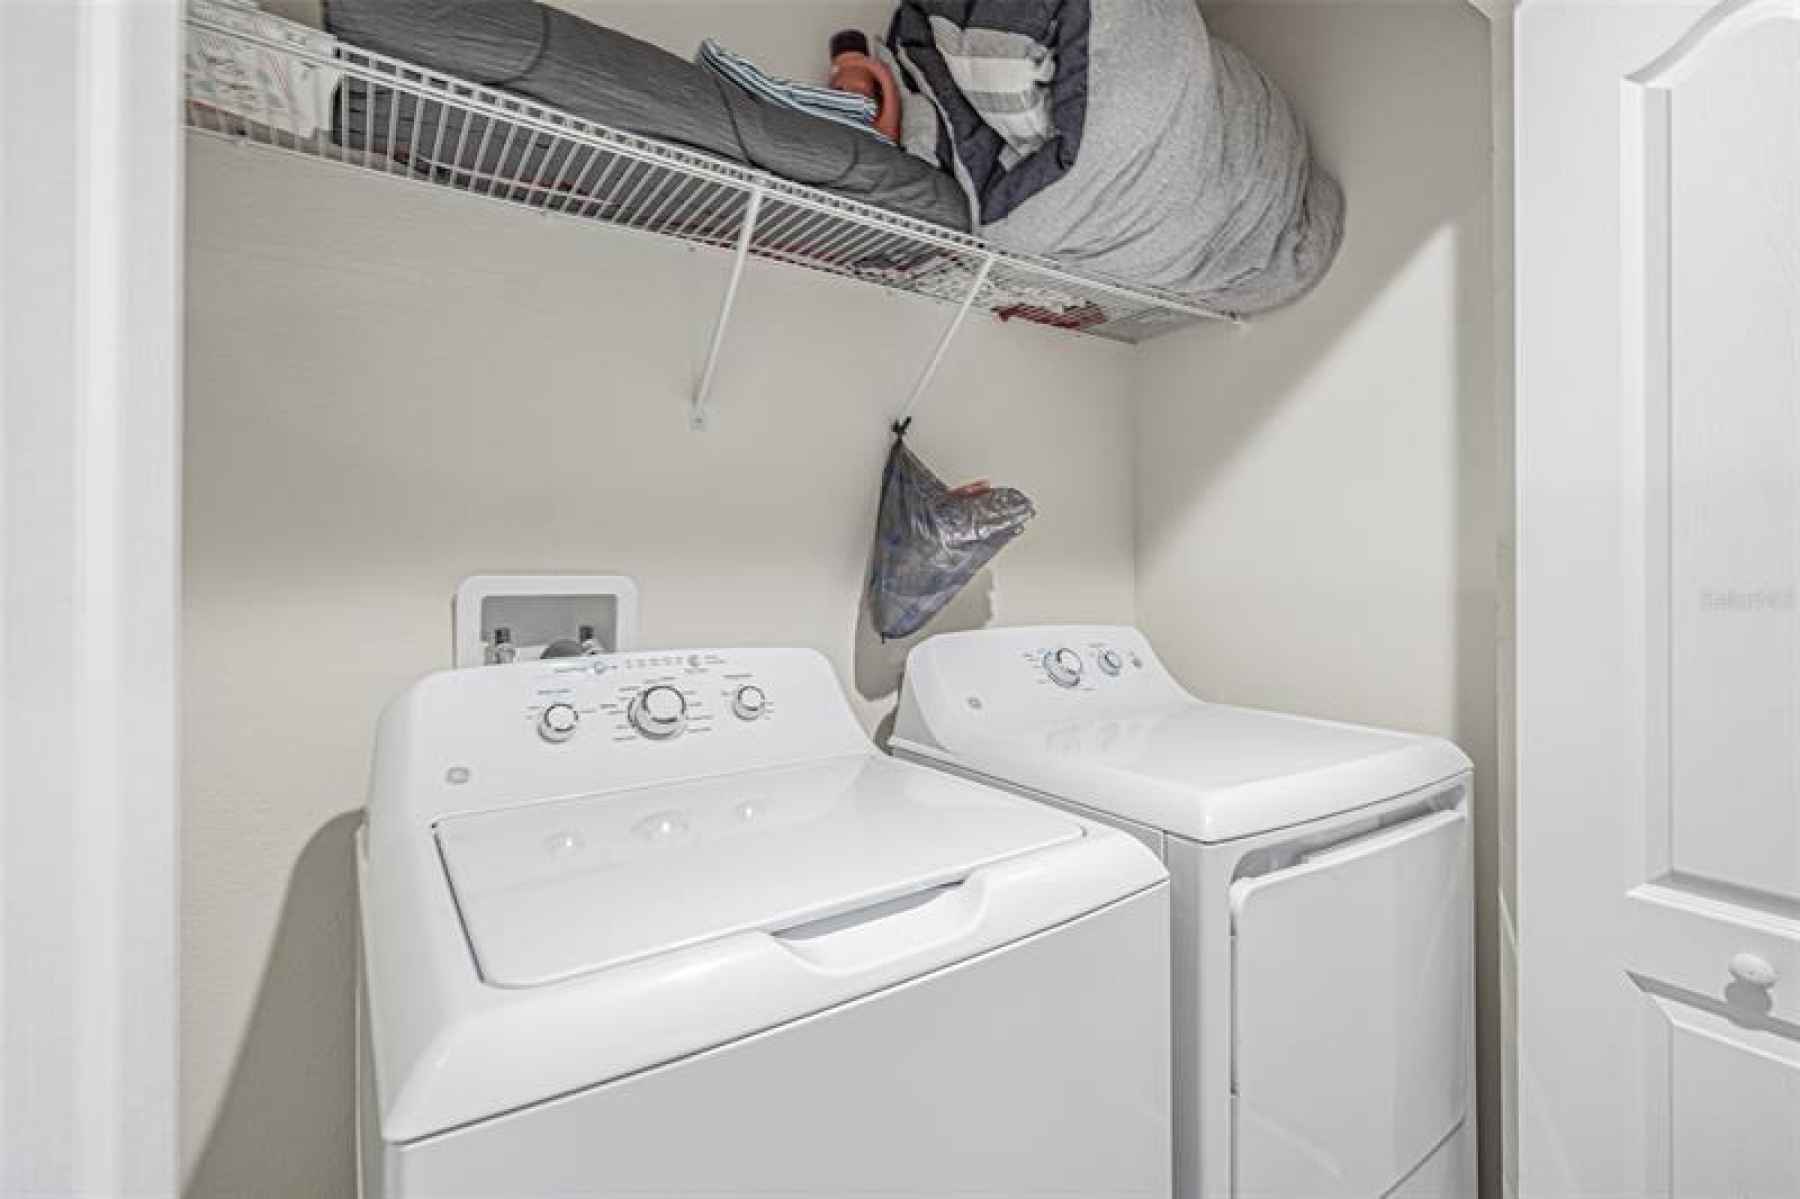 Large GE washer & dryer closet with extra storage space.